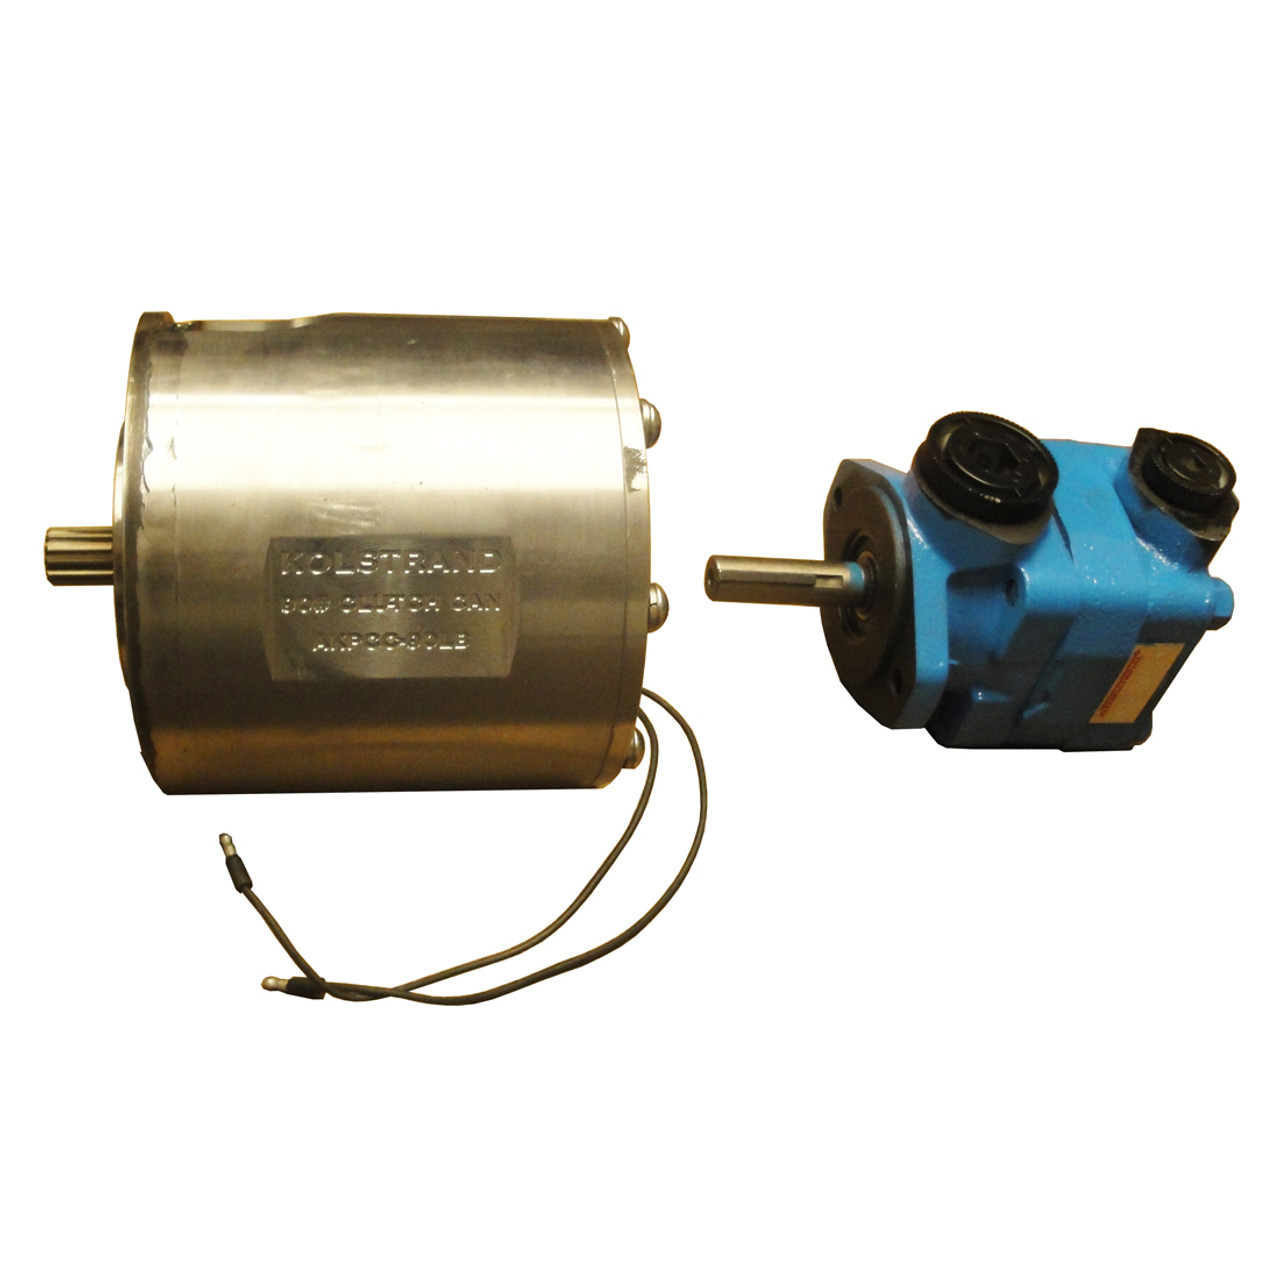 Kolstrand Clutch-Can Electro Clutch - 12 VDC - With the Optional V20 Hydraulic Pump